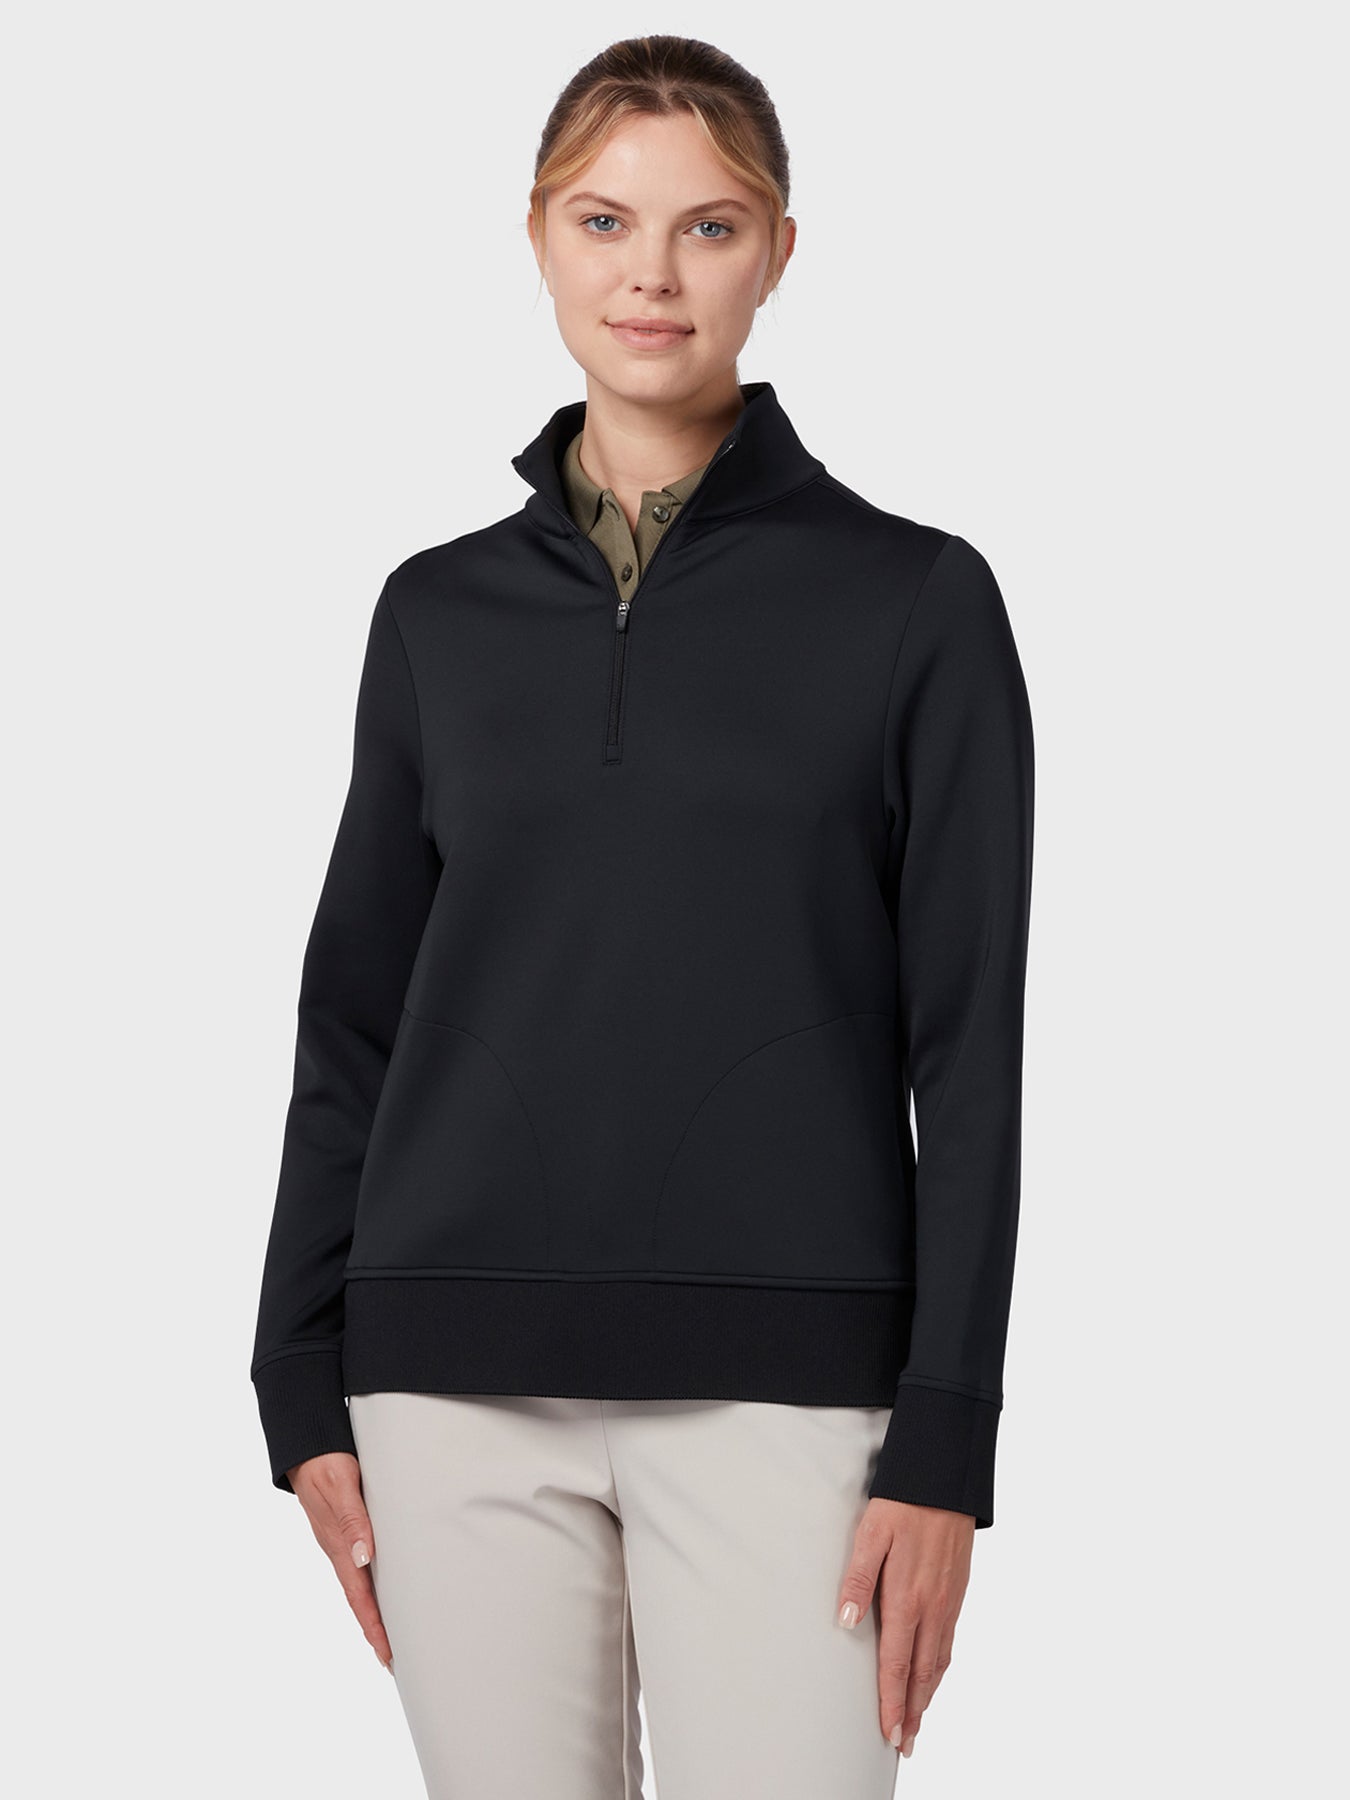 View Midweight Womens Fleece Crossover In Caviar Caviar M information